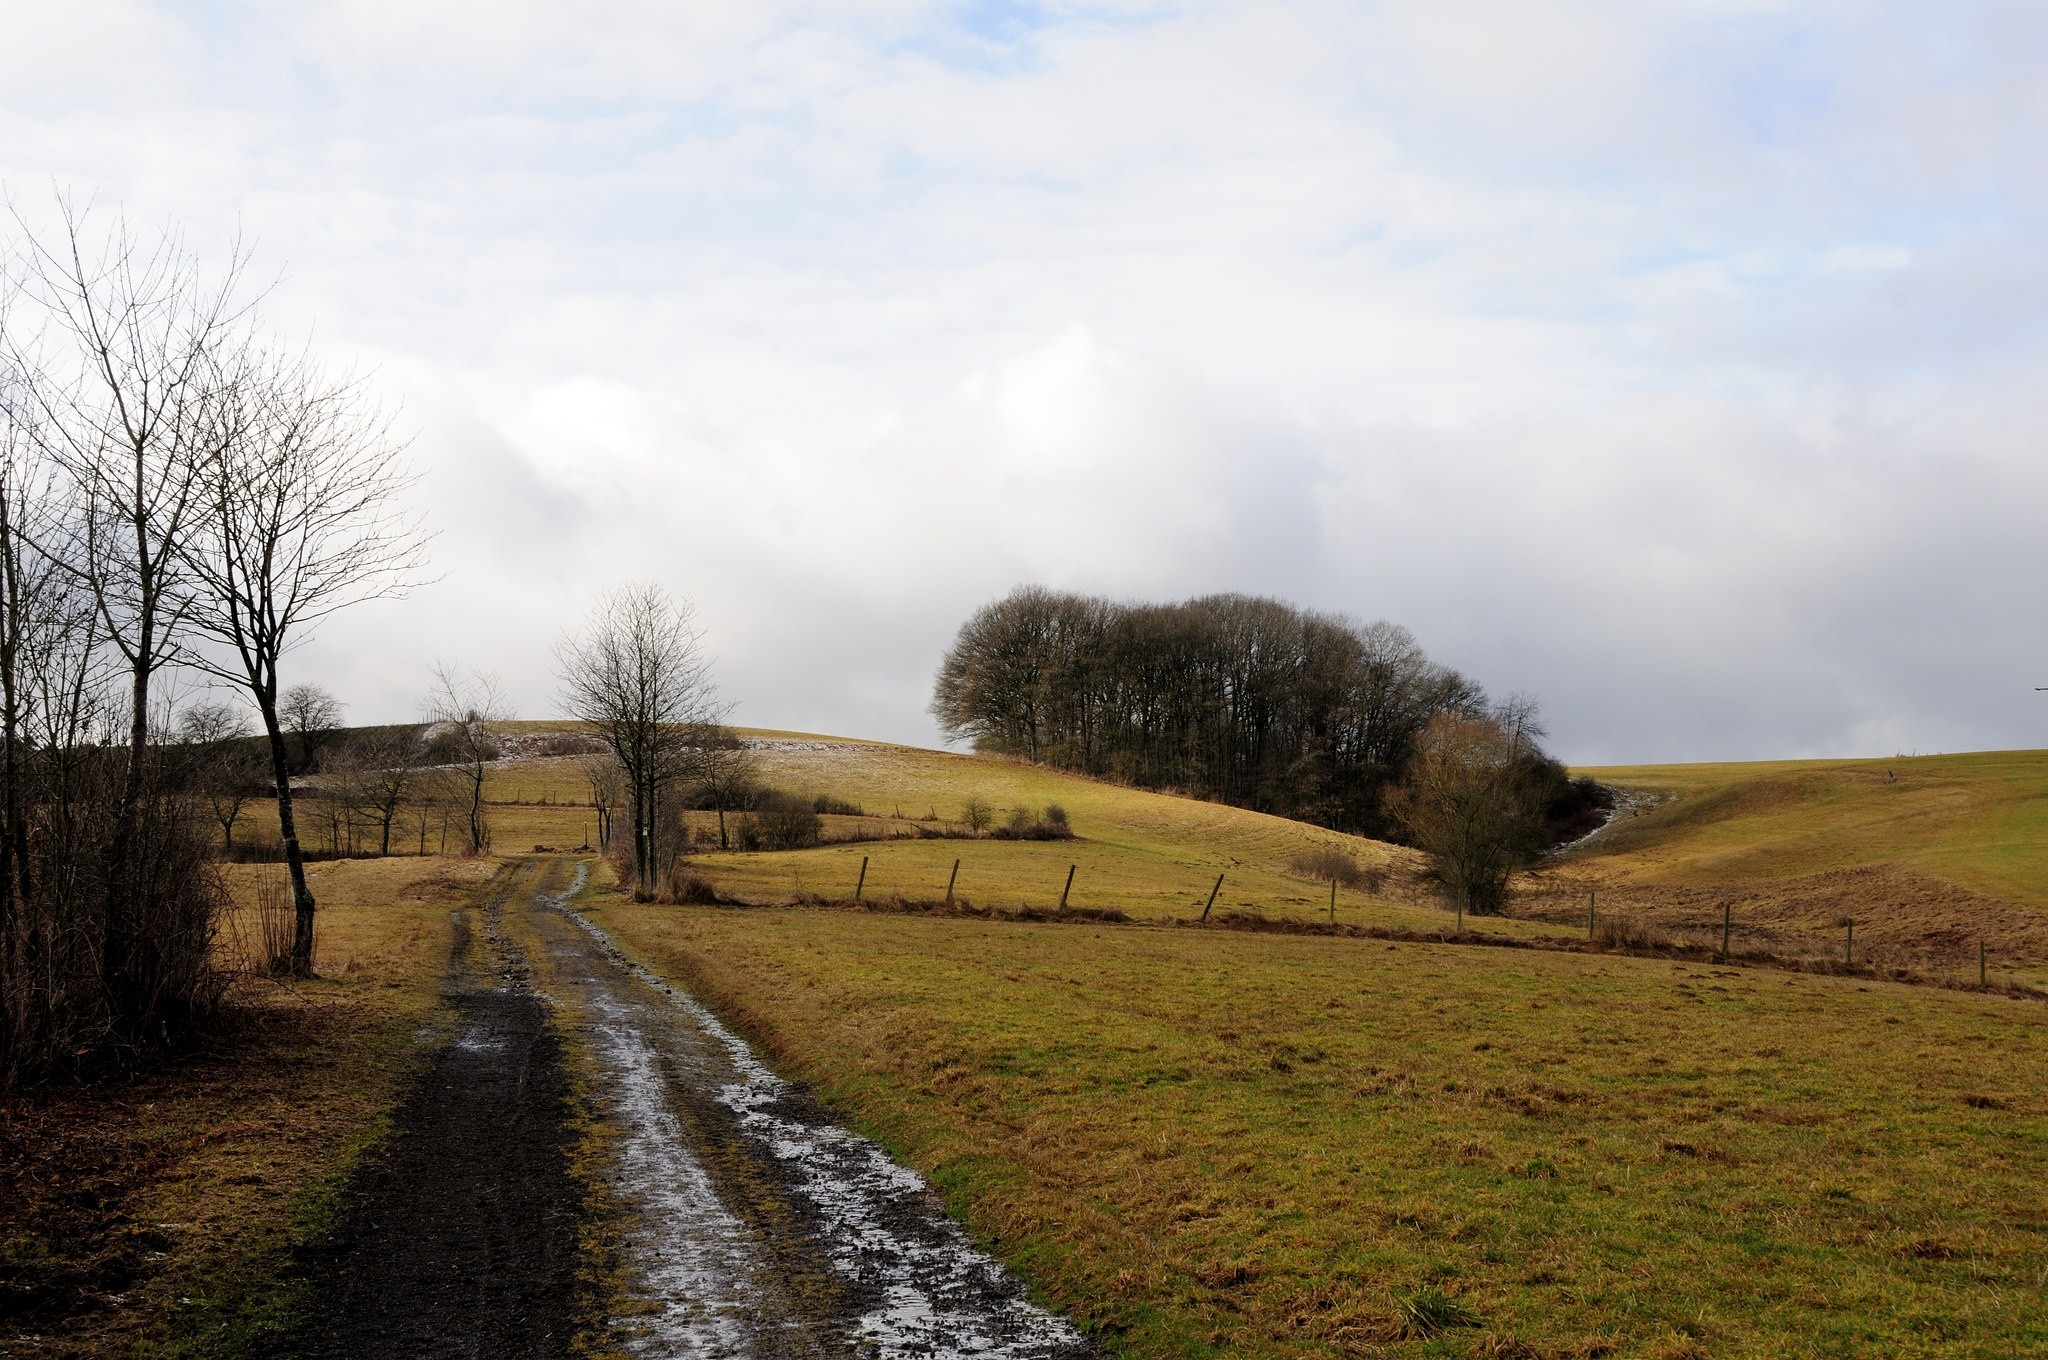 General 2048x1360 landscape dirt road nature field hills trees grass fence fall clouds brown